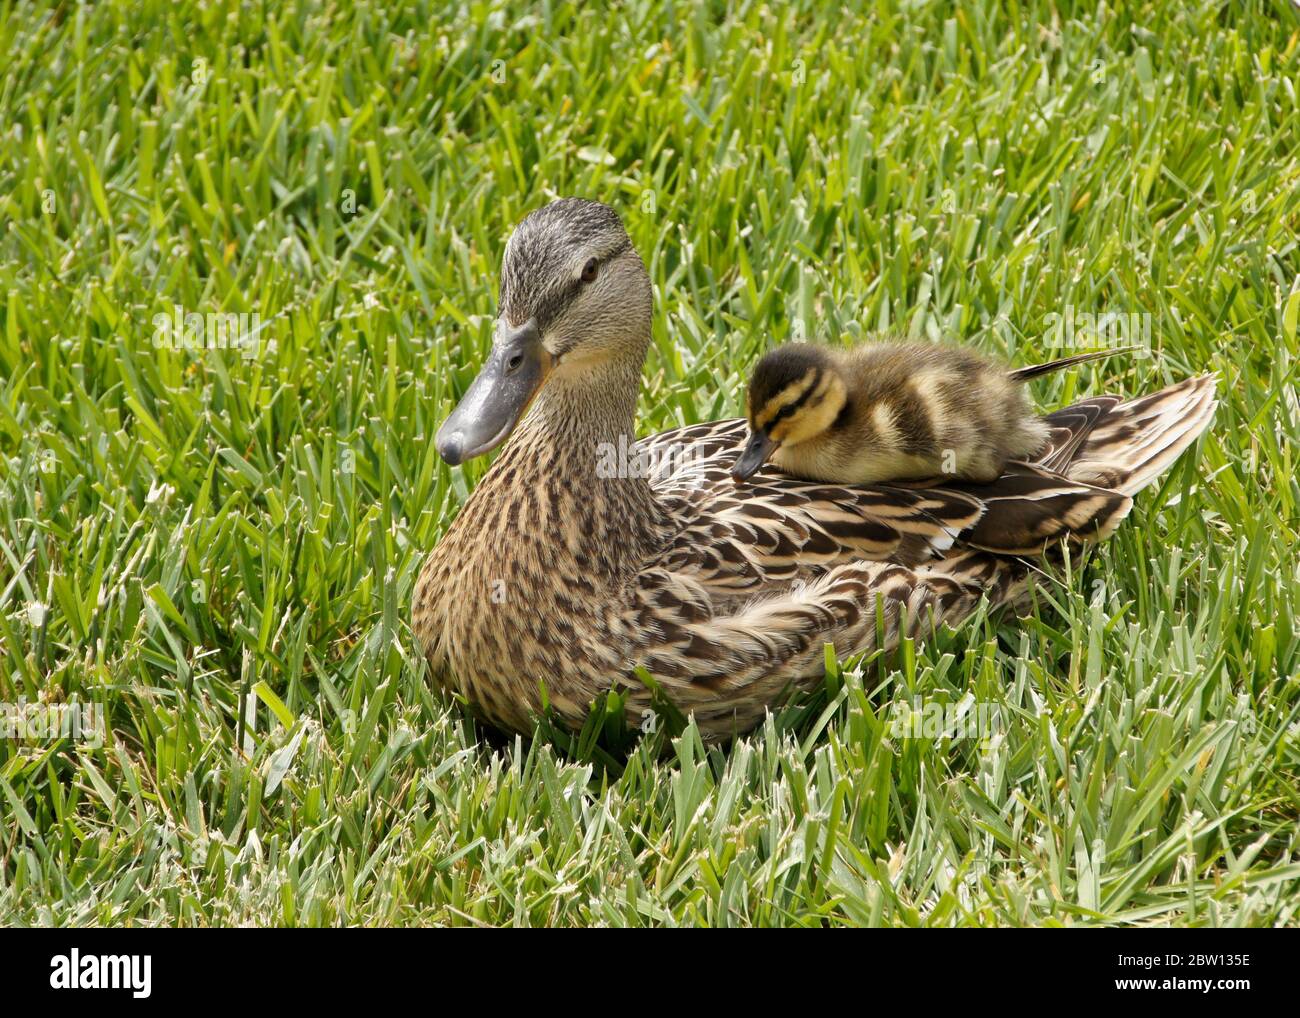 Female (hen) mallard duck resting in grass with duckling sitting on her back, Southern California Stock Photo